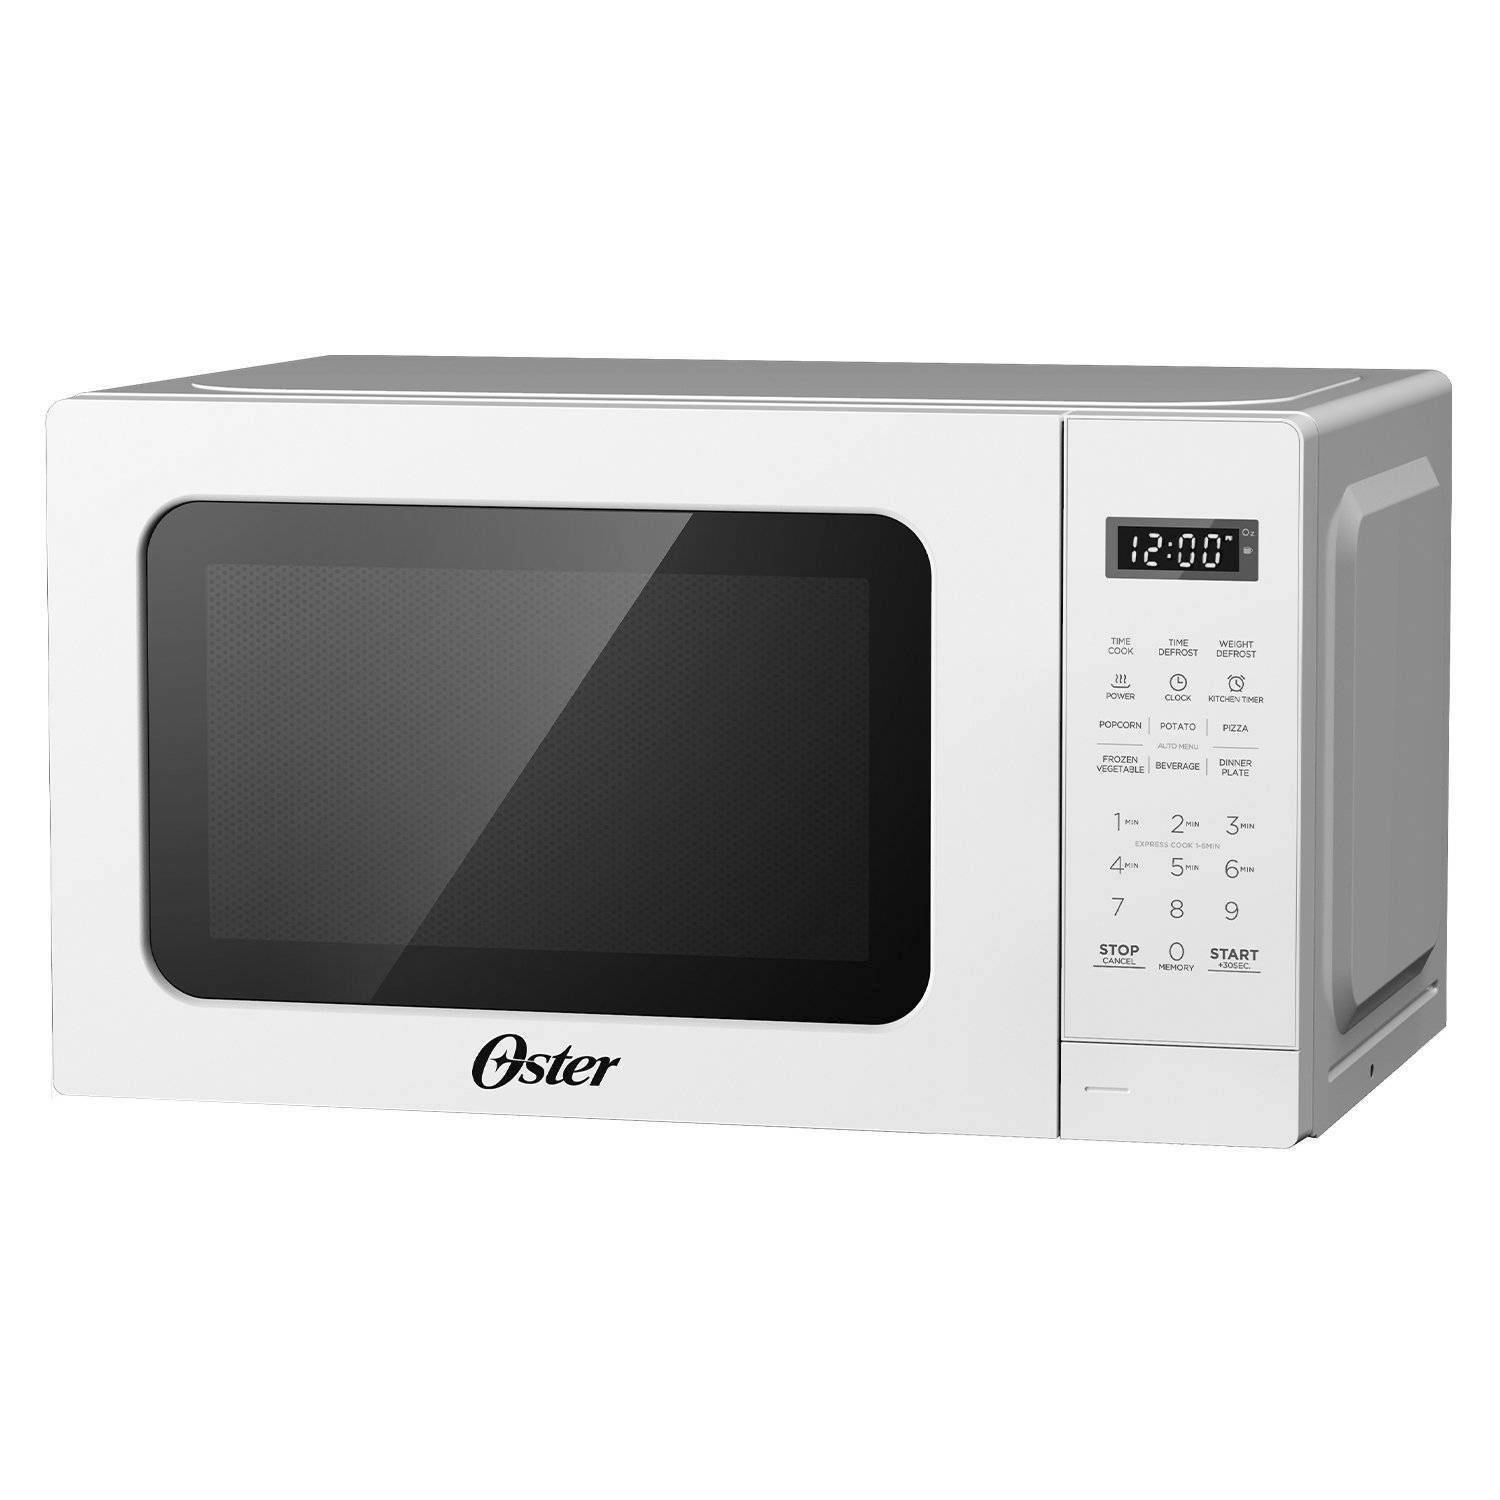 Horno Microondas Oster Pogme2701 20 Lt 700W